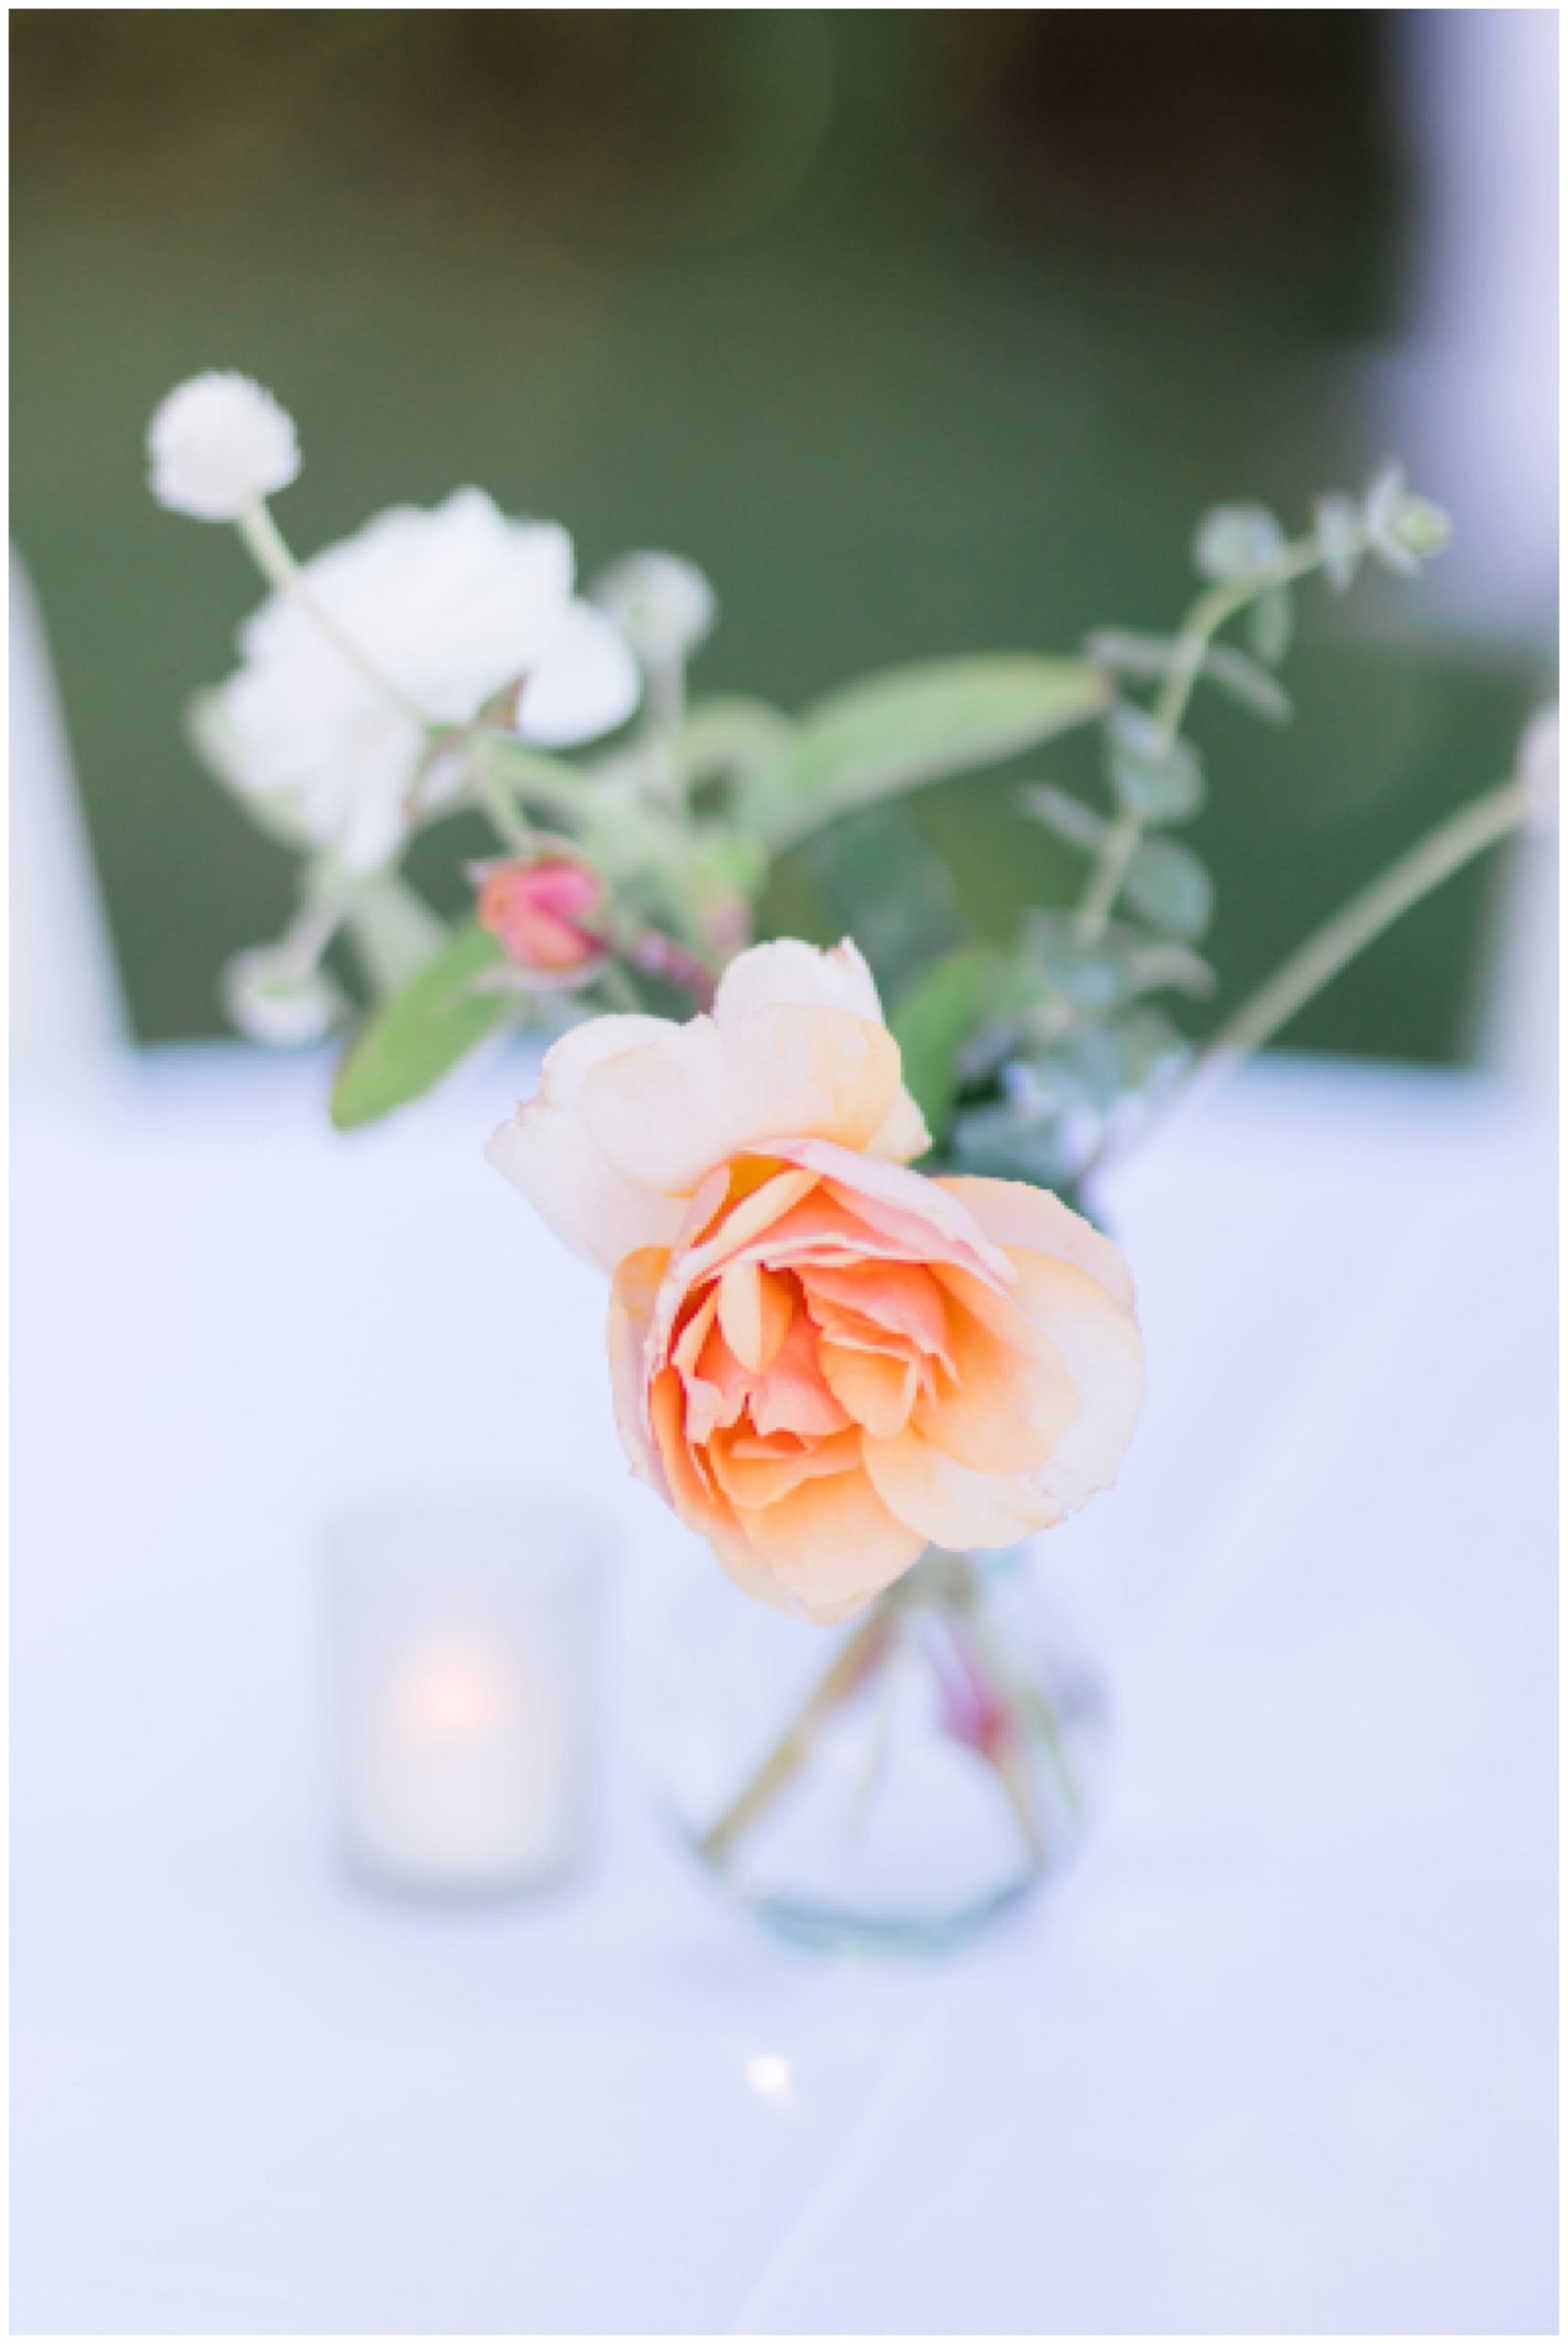 light and romantic flowers from wedding reception